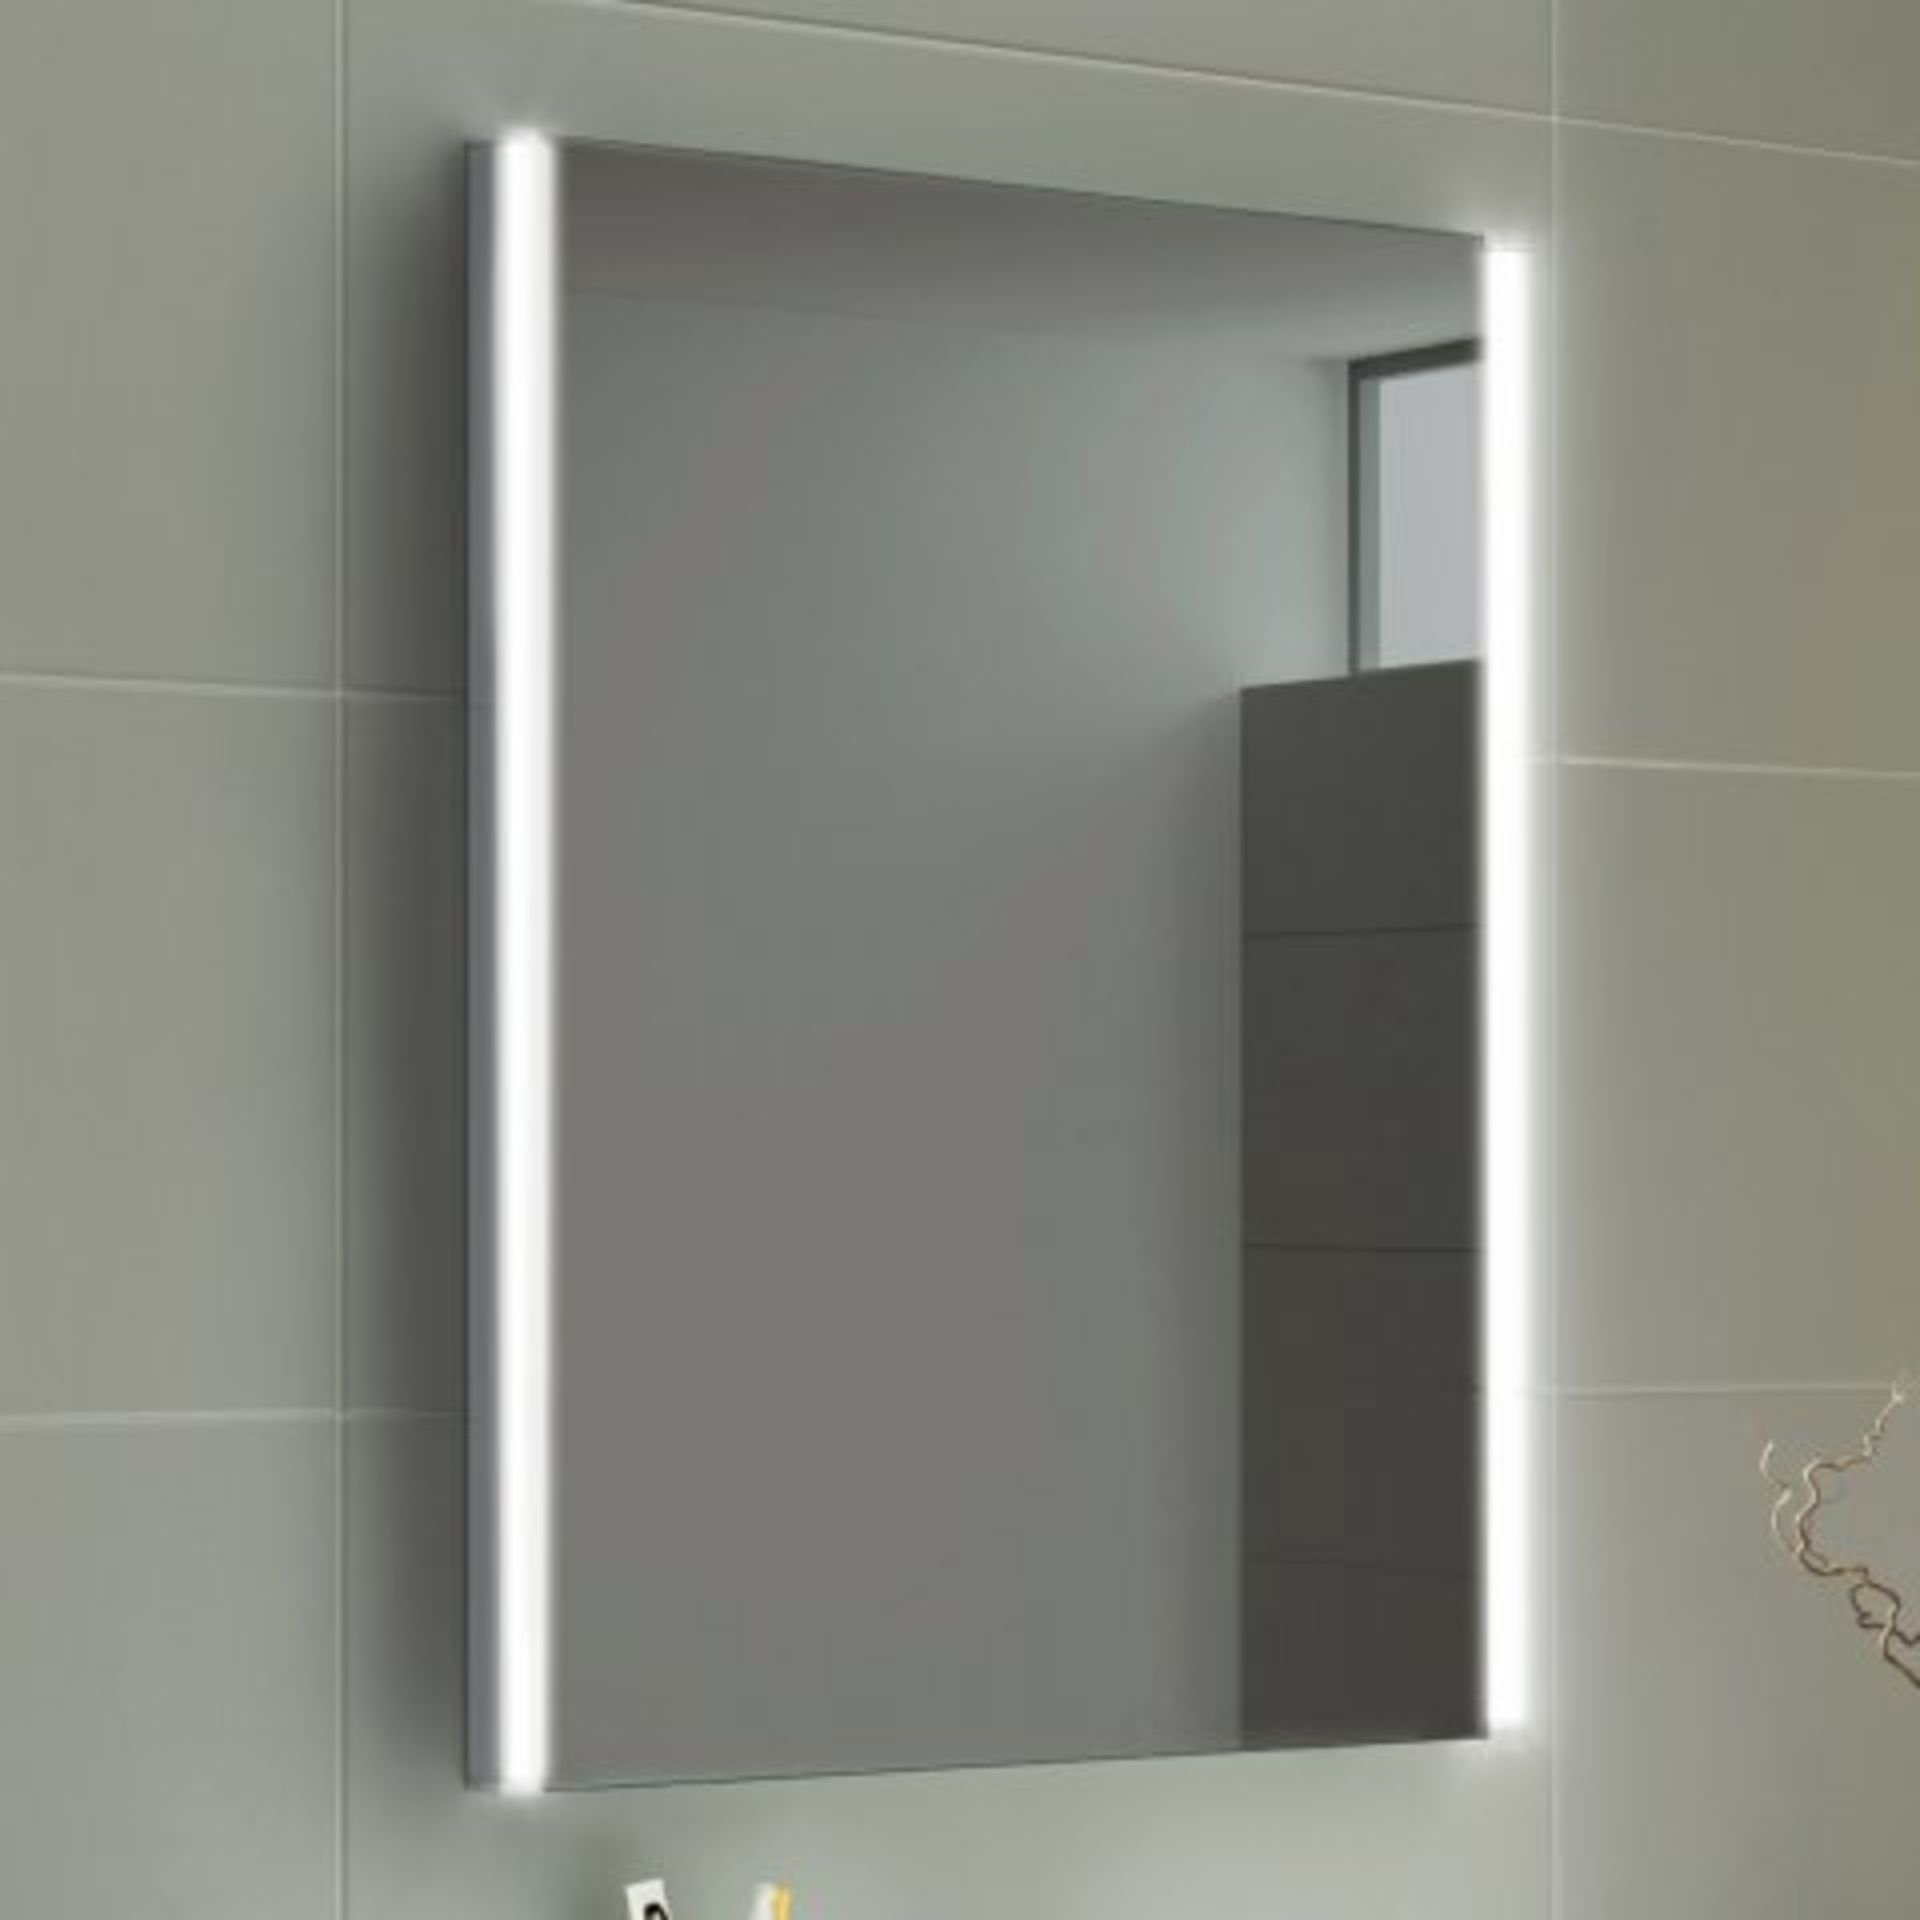 (P41) 500x700mm Lunar LED Mirror - Battery Operated. RRP £249.99. Our ultra-flattering LED Battery